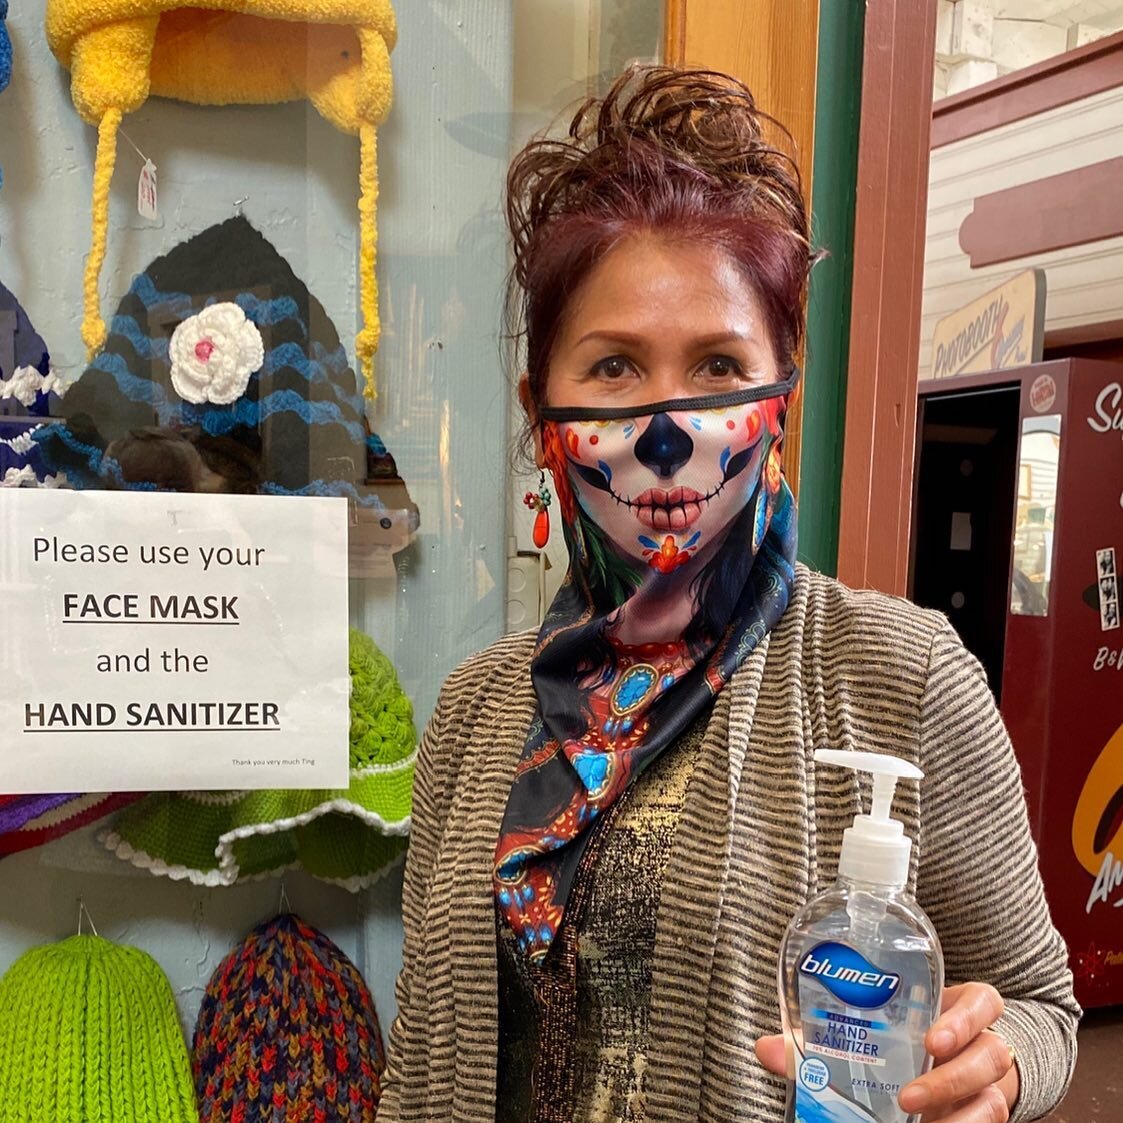 Face Masks are available #facemask #safety #staysafe #handsanitizers #washyourhands #covid19 #fortbraggca